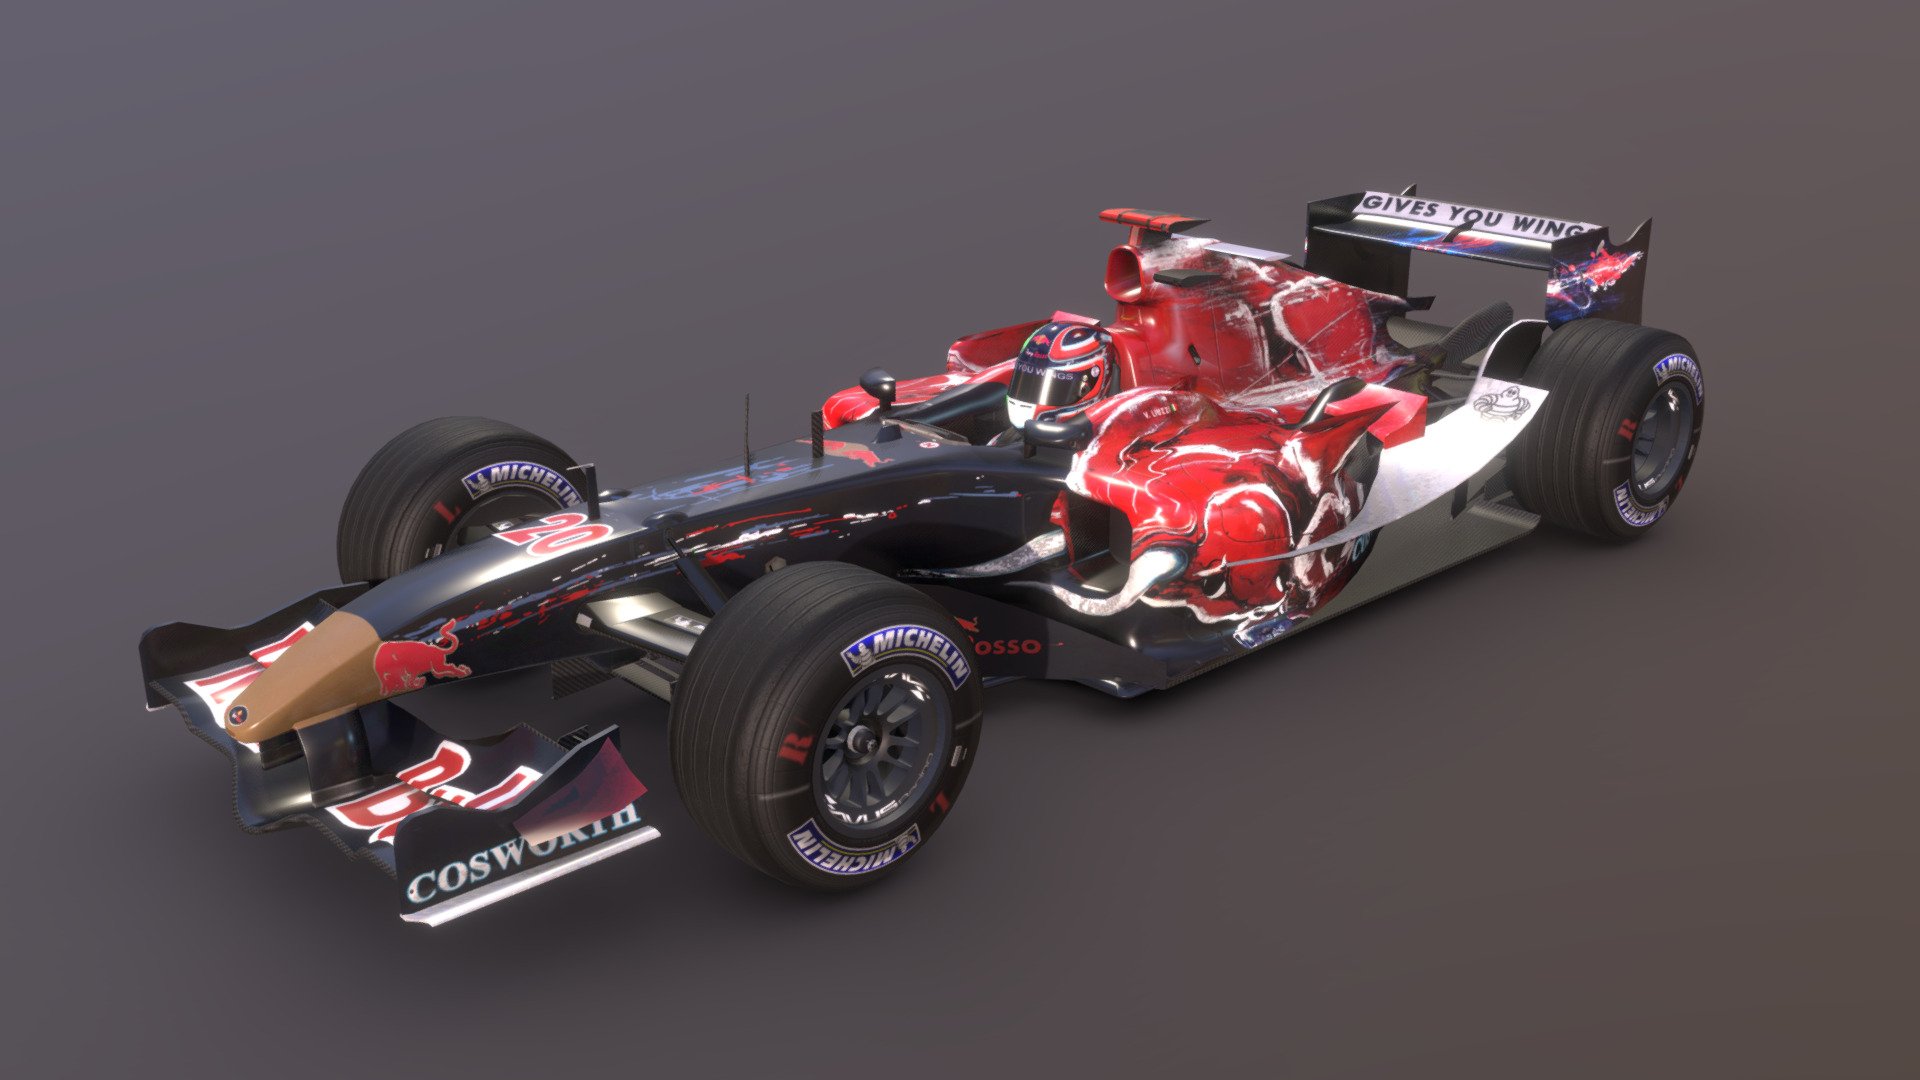 This game model of the Toro Rosso F1 car of 2006 was created for the CTDP F1 2006 mod.

History of the model: http://devblog.ctdp.net/2008/08/house-cleaning/
Making Of the textures: http://devblog.ctdp.net/2009/01/fattura-del-toro-rosso/ - Toro Rosso STR-01 (Canada 2006 Edition) - 3D model by Dahie 3d model